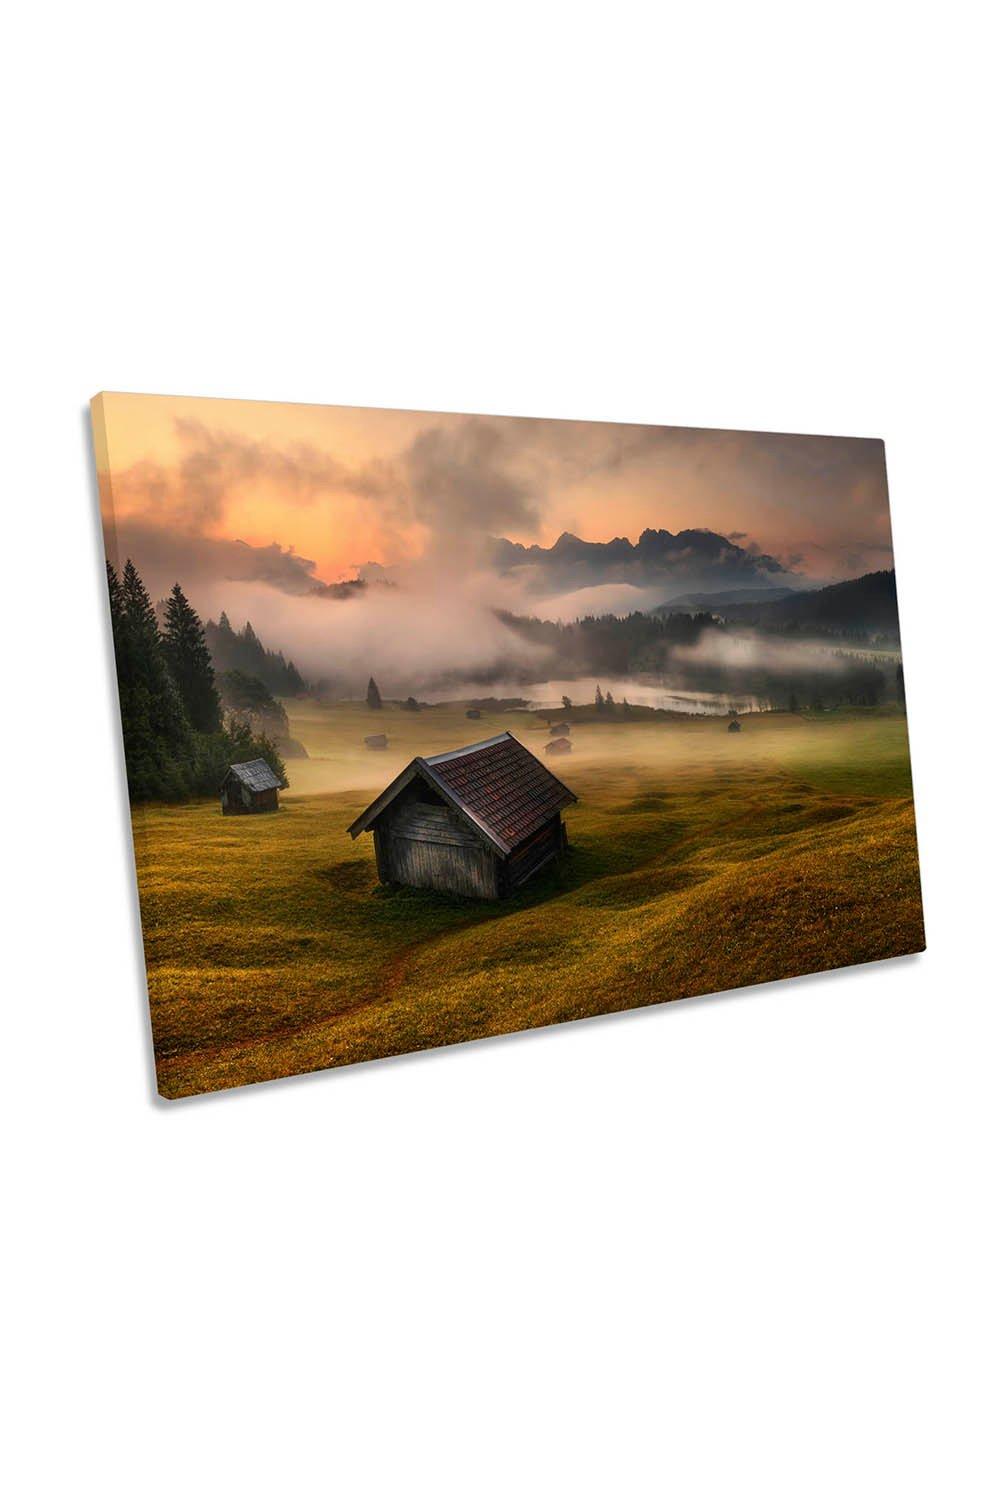 Misty Mountain Side Barns Countryside Canvas Wall Art Picture Print